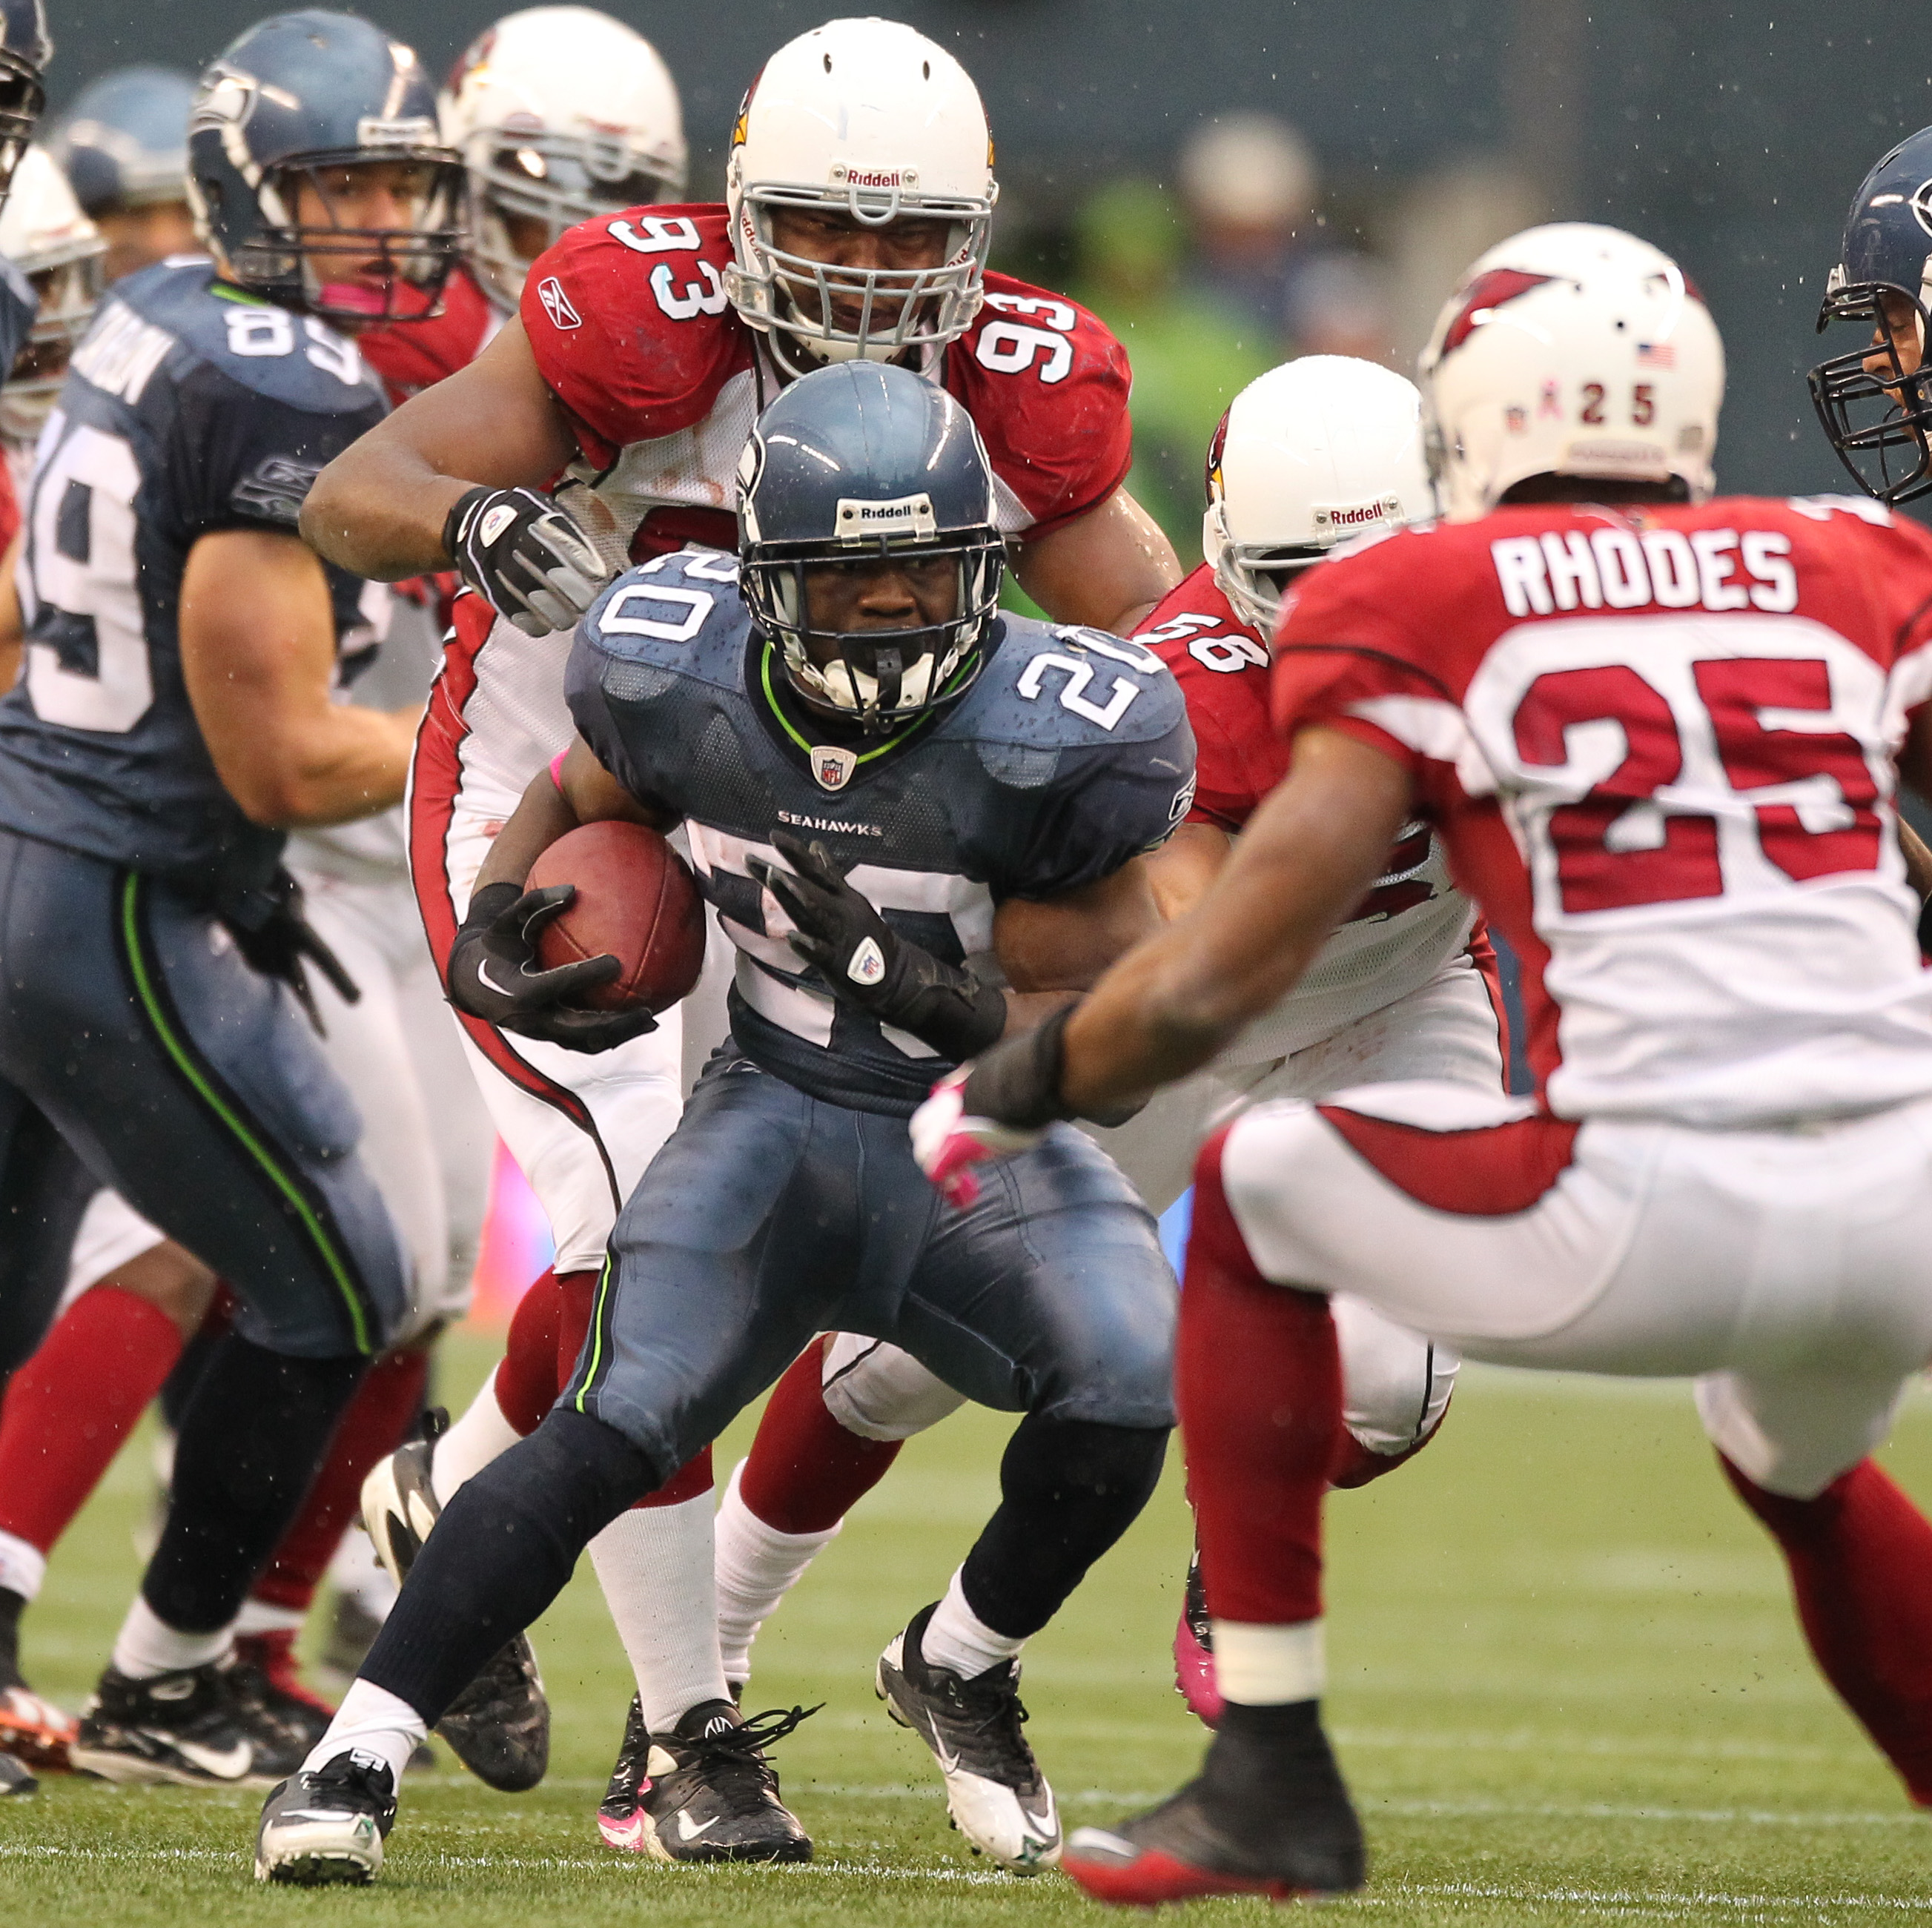 SEATTLE - OCTOBER 24:  Running back Justin Forsett #20 of the Seattle Seahawks rushes against the Arizona Cardinals at Qwest Field on October 24, 2010 in Seattle, Washington. (Photo by Otto Greule Jr/Getty Images)